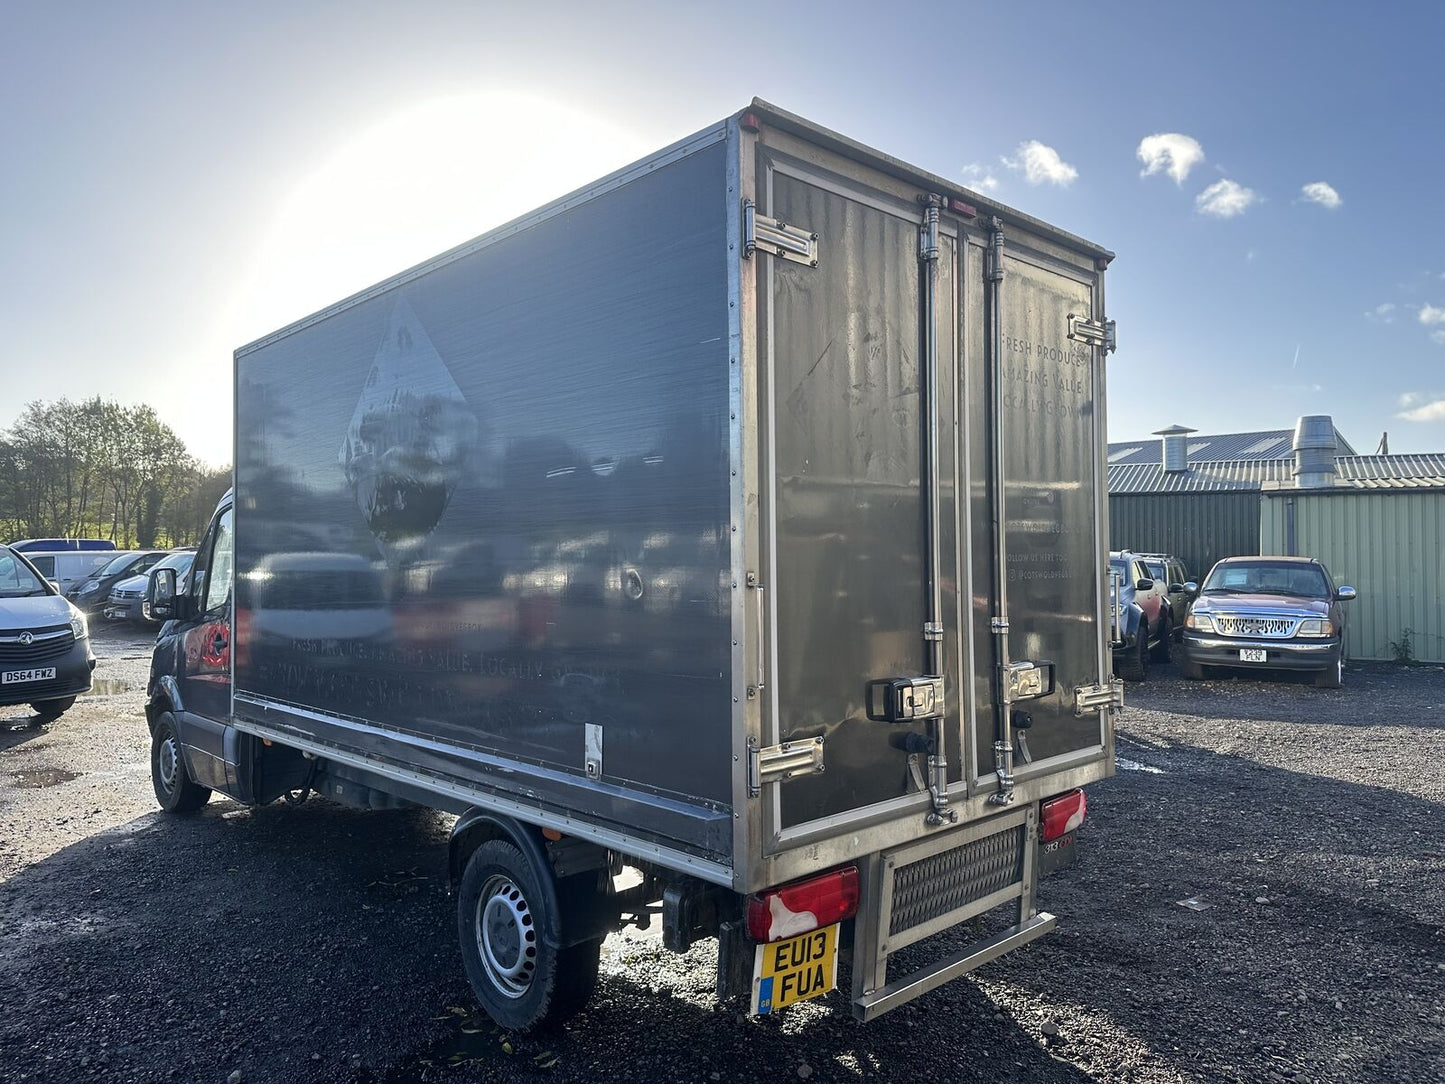 Bid on COOL GREY CRUISER: 2013 MERCEDES SPRINTER 313 FRIDGE VAN - READY TO ROLL- Buy &amp; Sell on Auction with EAMA Group